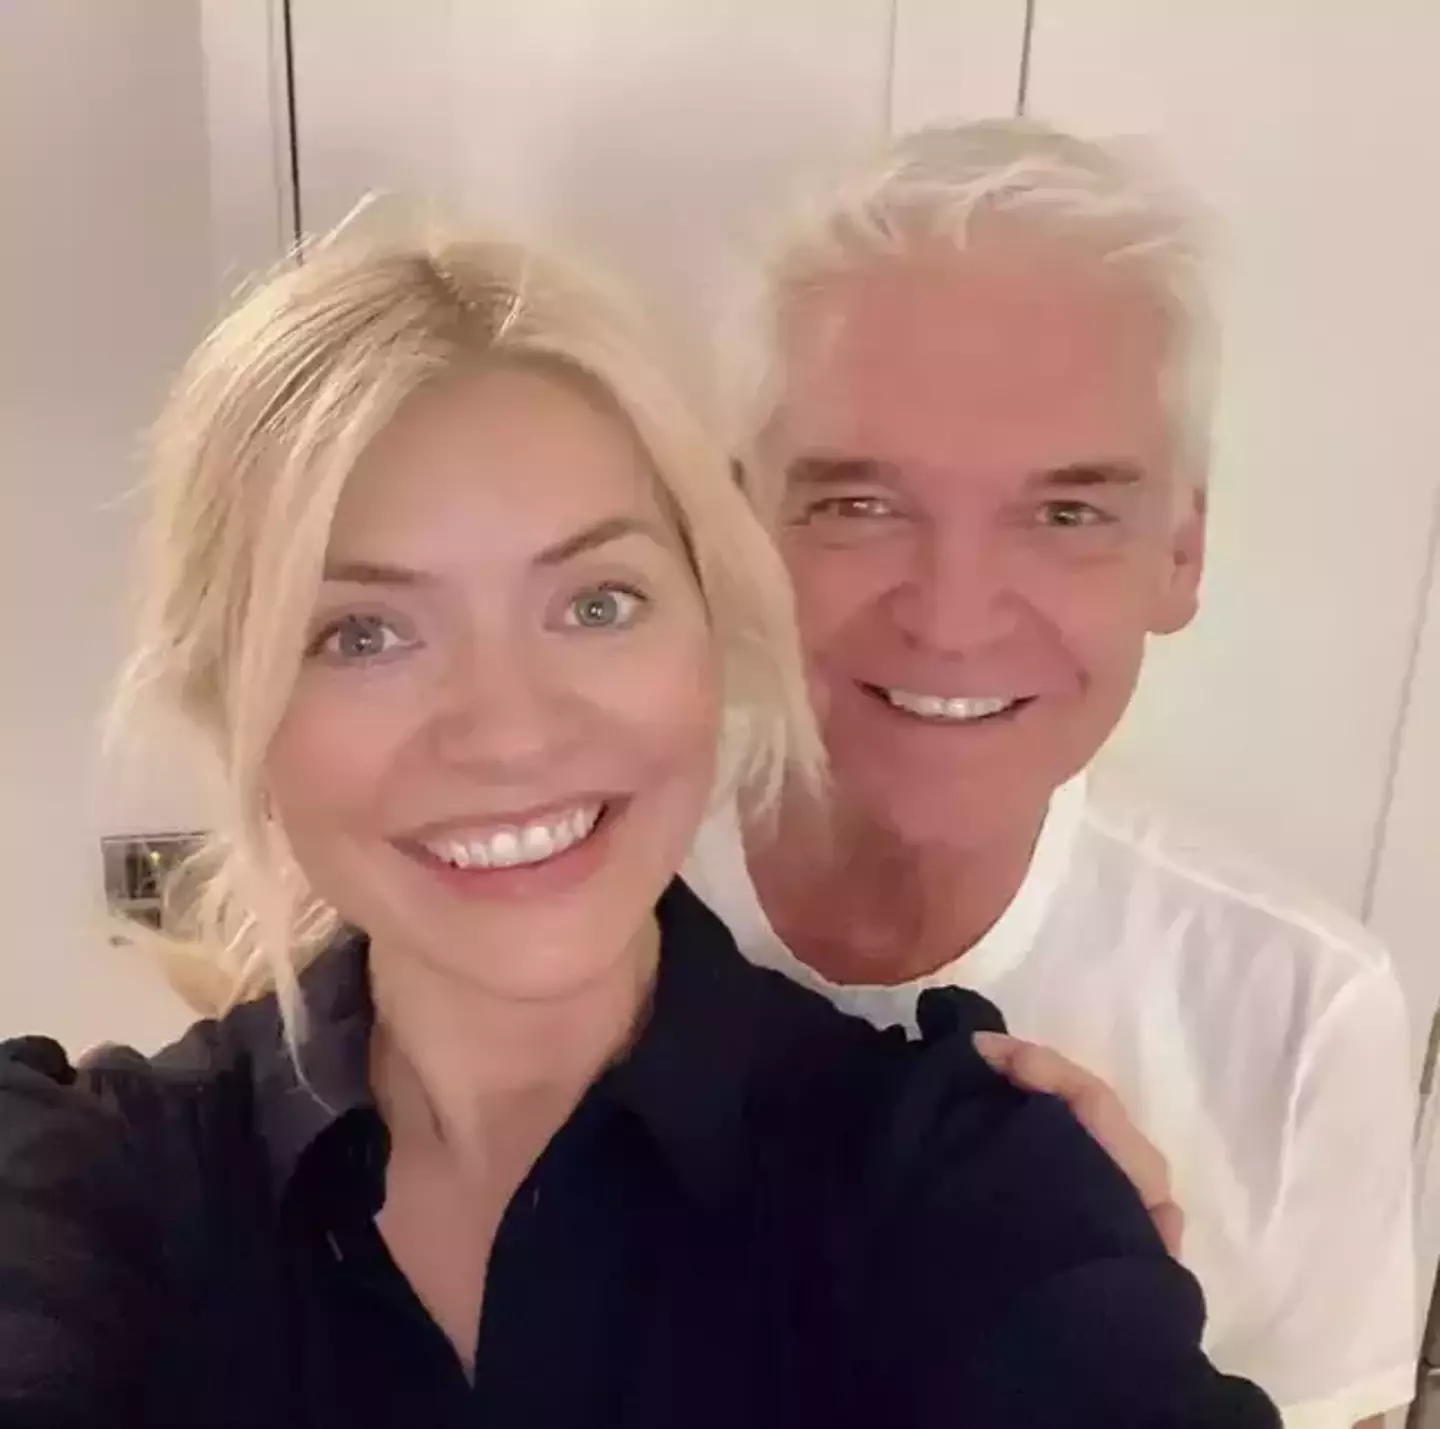 Holly Willoughby will be staying on the show amid Phillip Schofield's departure.